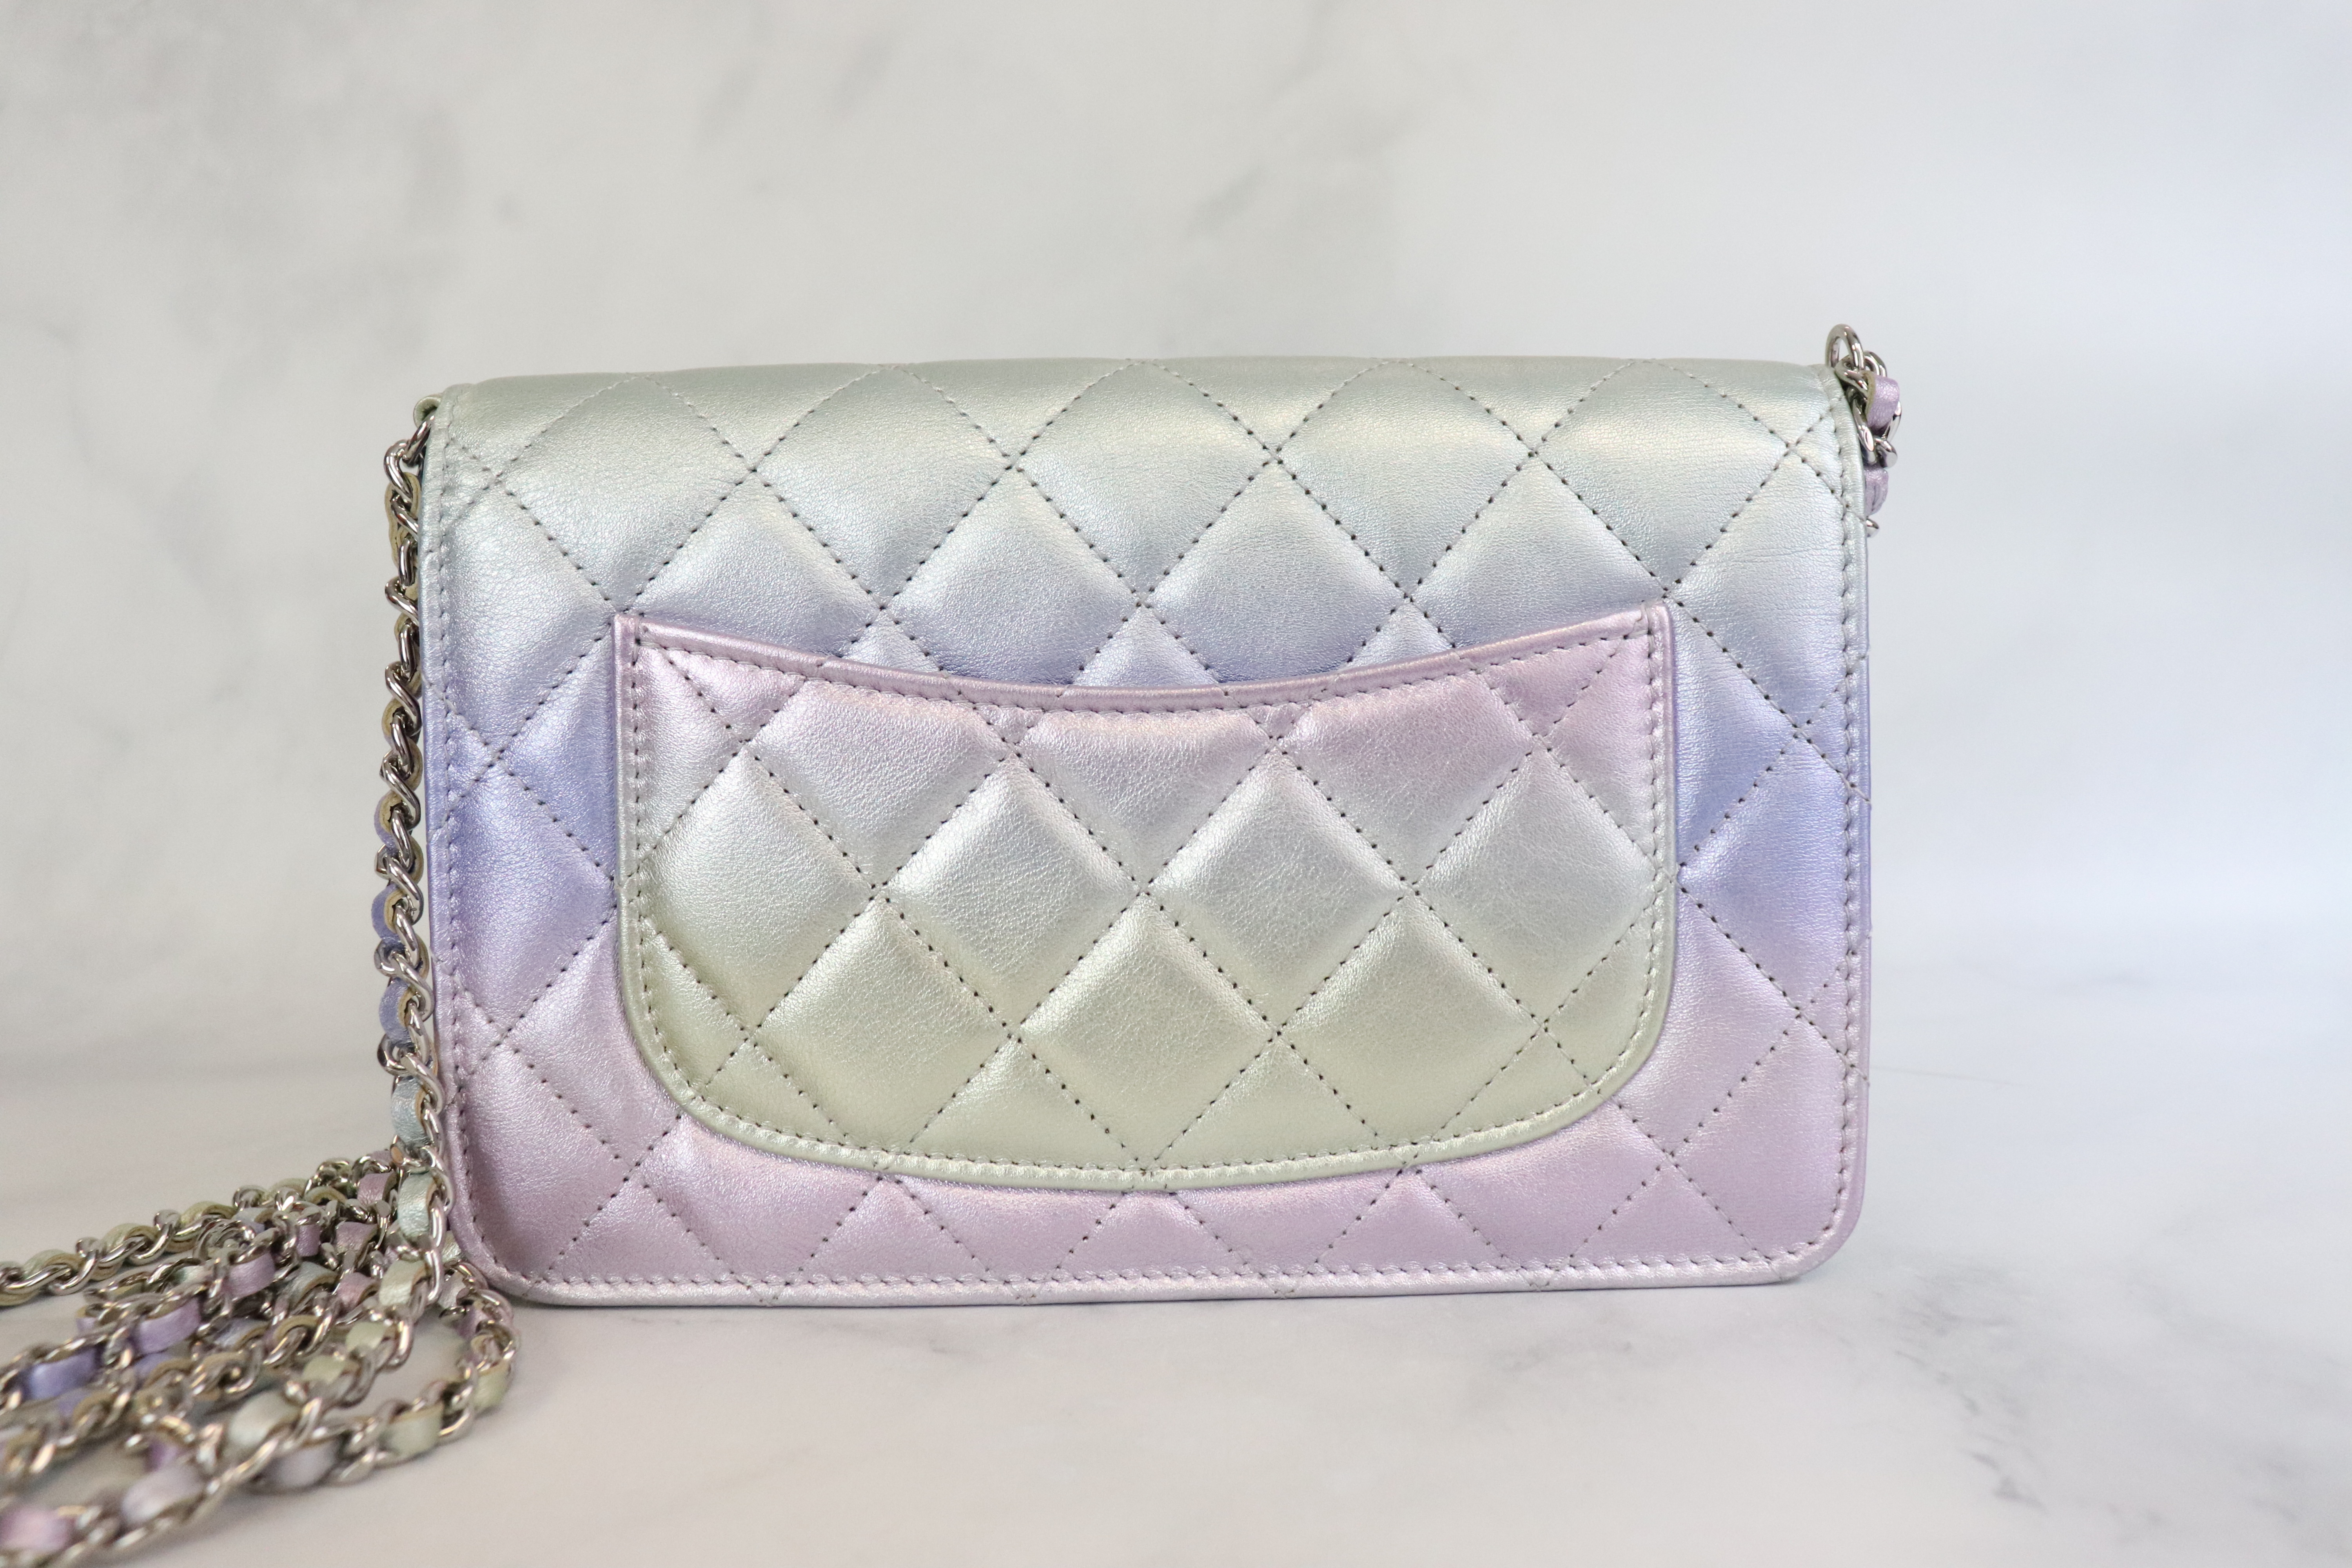 Holographic Chanel purse, IG: threadsstyling